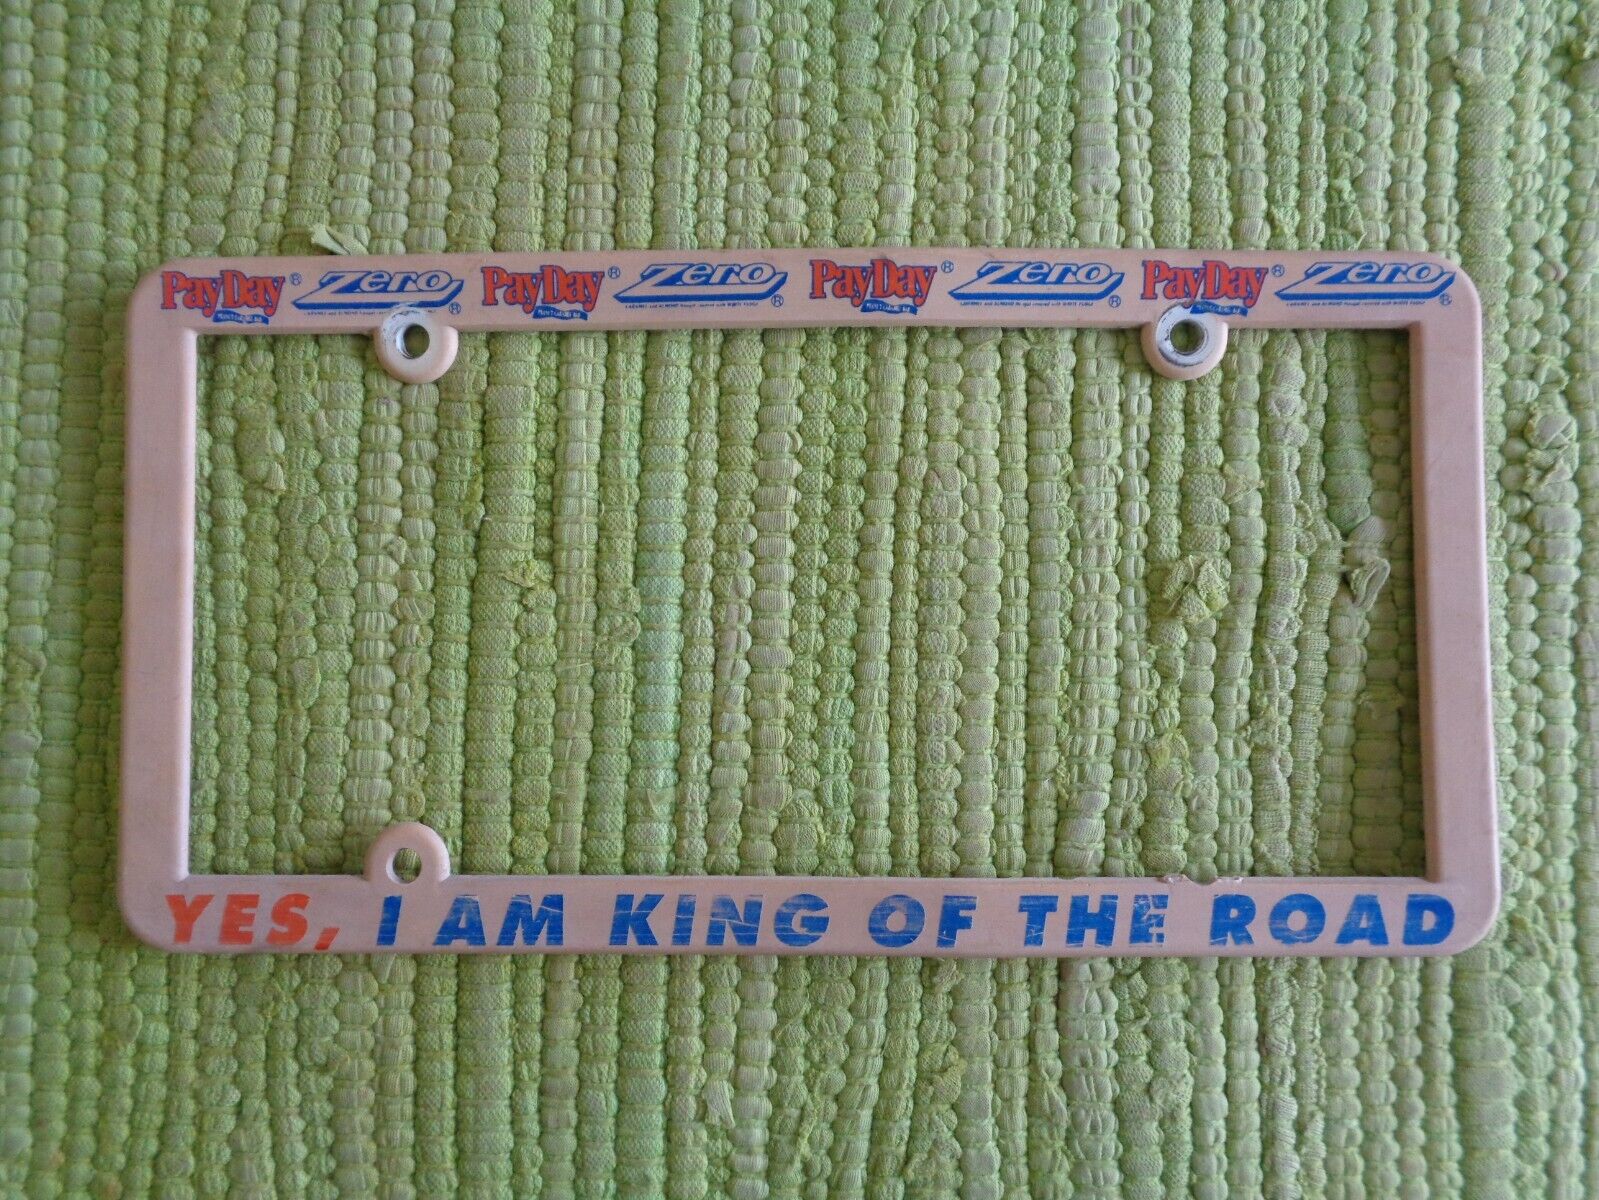 Vintage Payday Zero I am King of the Road LICENSE PLATE FRAME Hershey Candy Bar